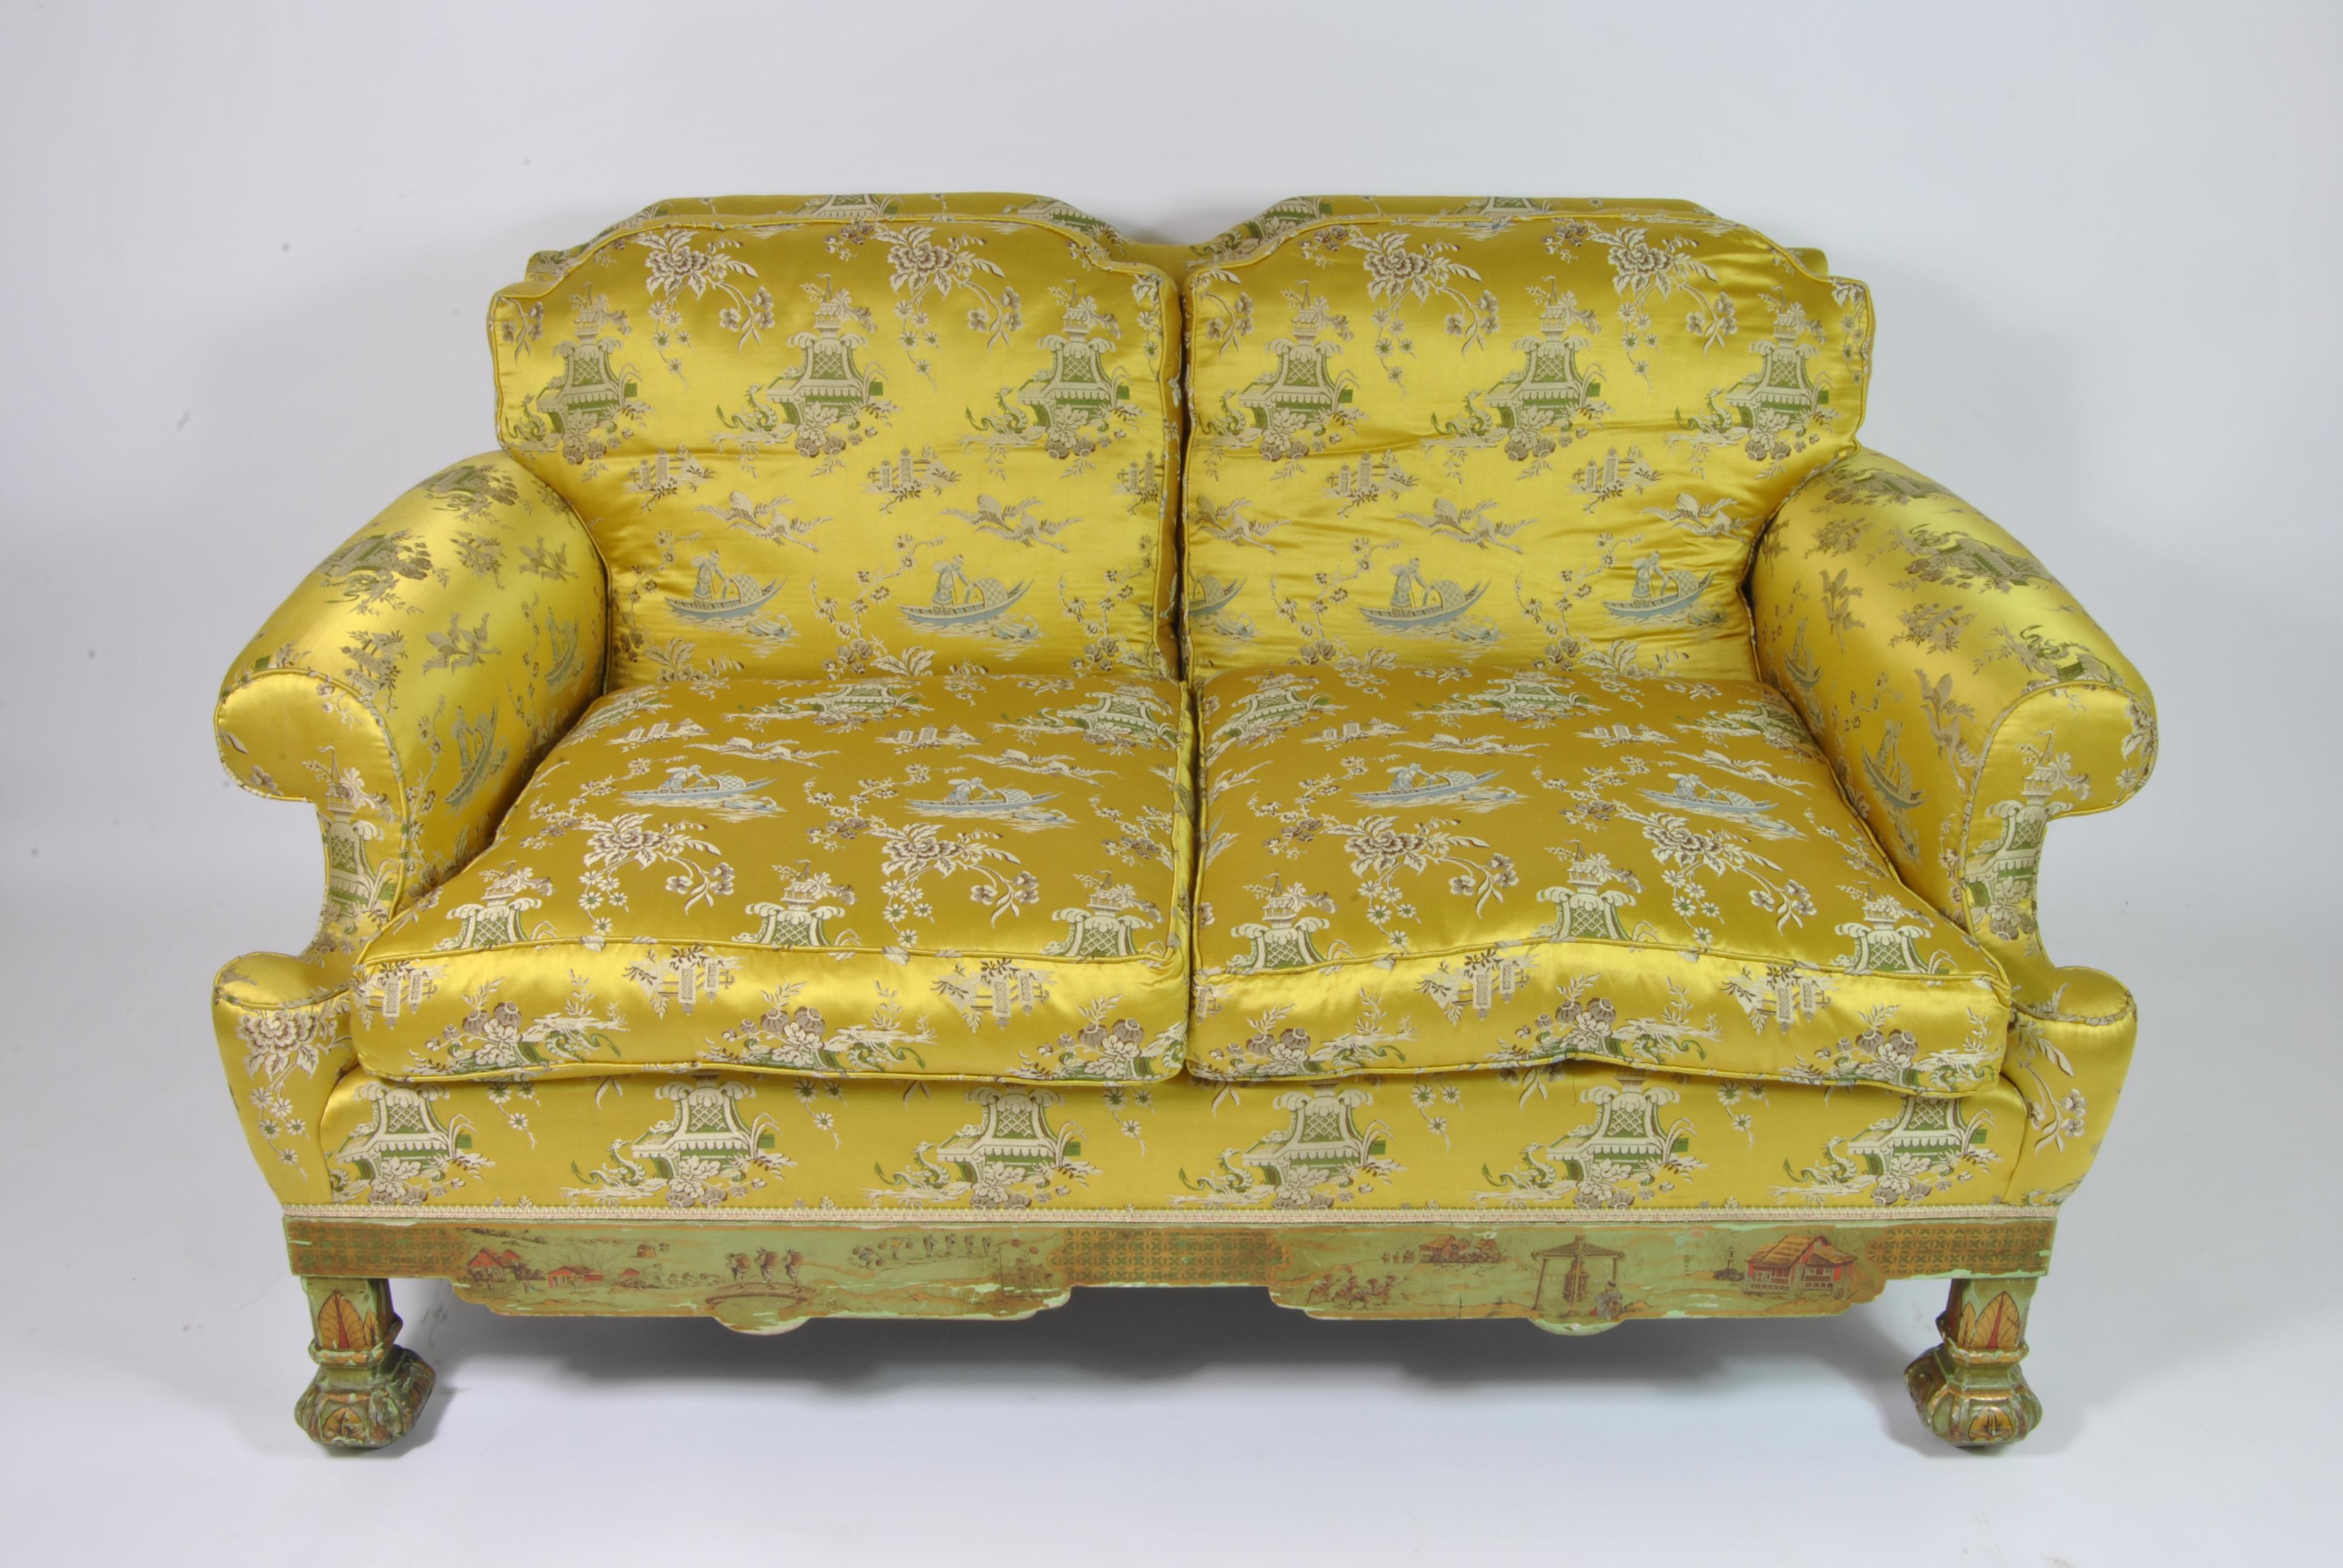 Chinoiserie living room with sofa and two armchairs, France, 1890.
The sofa and armchairs are upholstered with the original silk, the decorations have been made by hand.
Measures: Sofa cm 135 x 85 x H 78; HS 45
Armchairs cm 75 x 80 x H 78; HS 45.